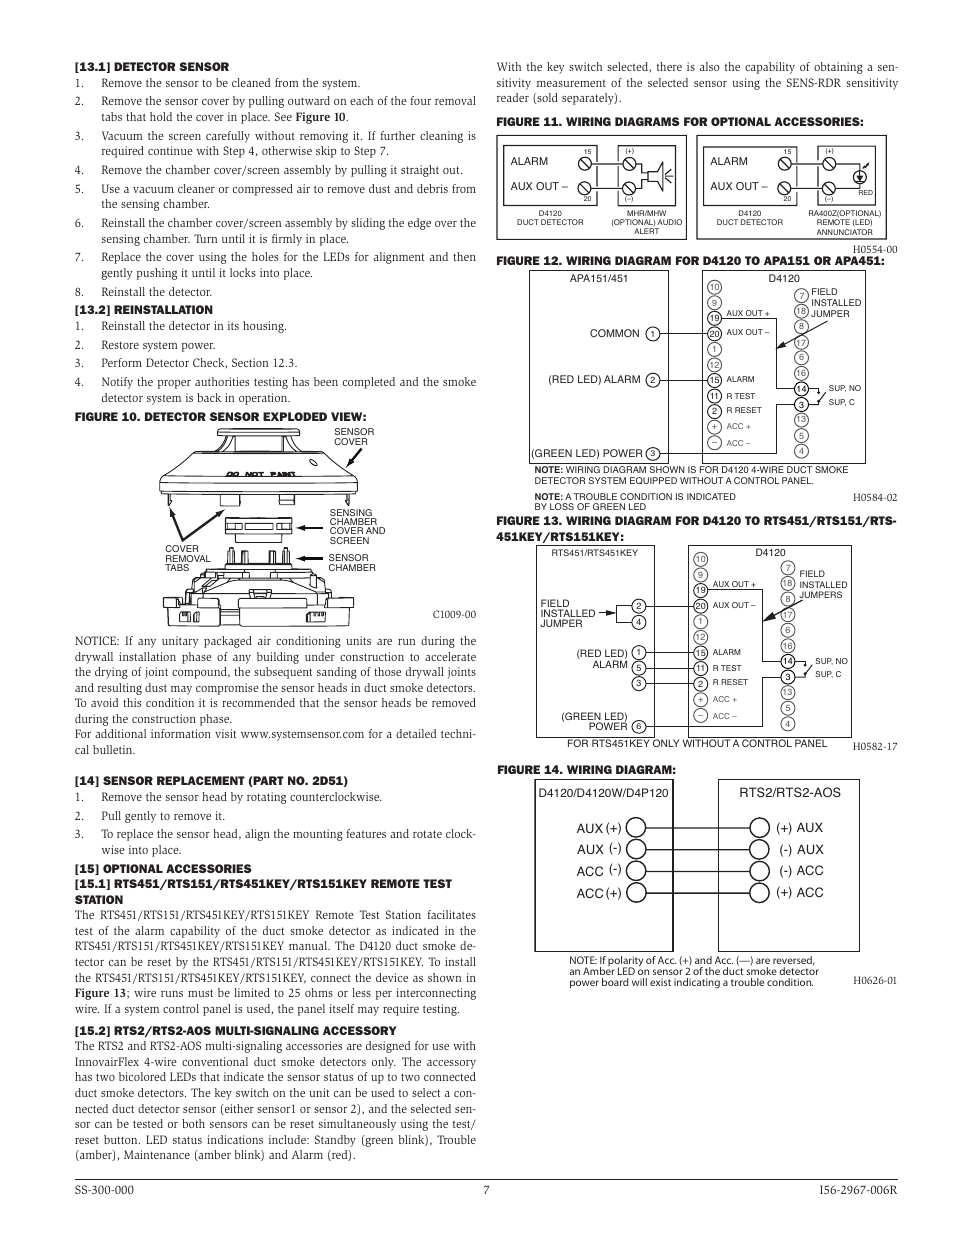 System Sensor D4120, D4P120, and D4S User Manual | Page 7 / 8